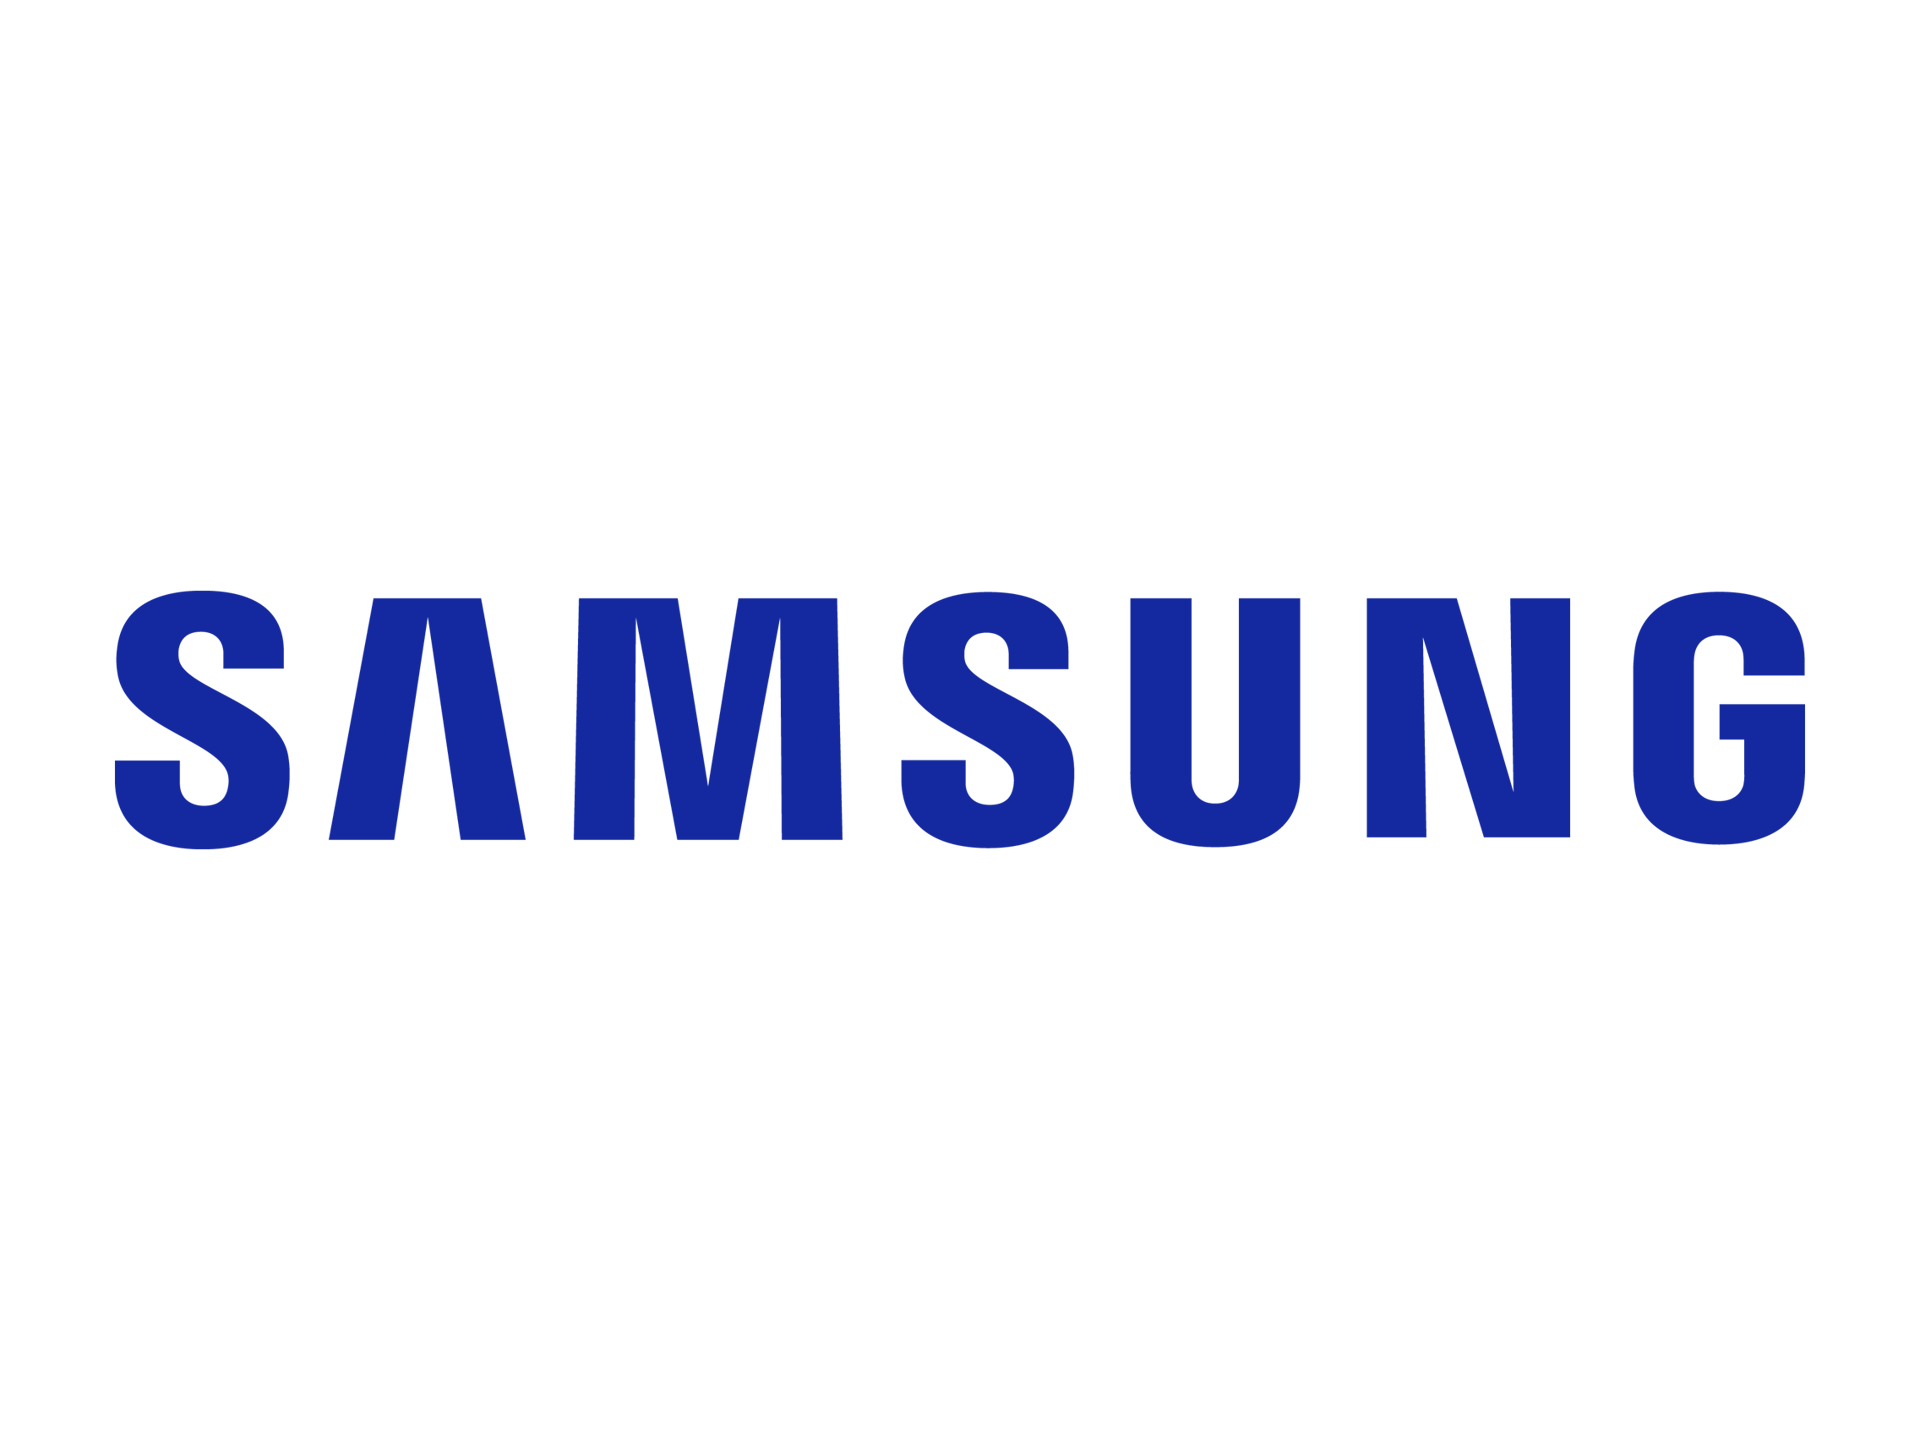 Picture for category SAMSUNG